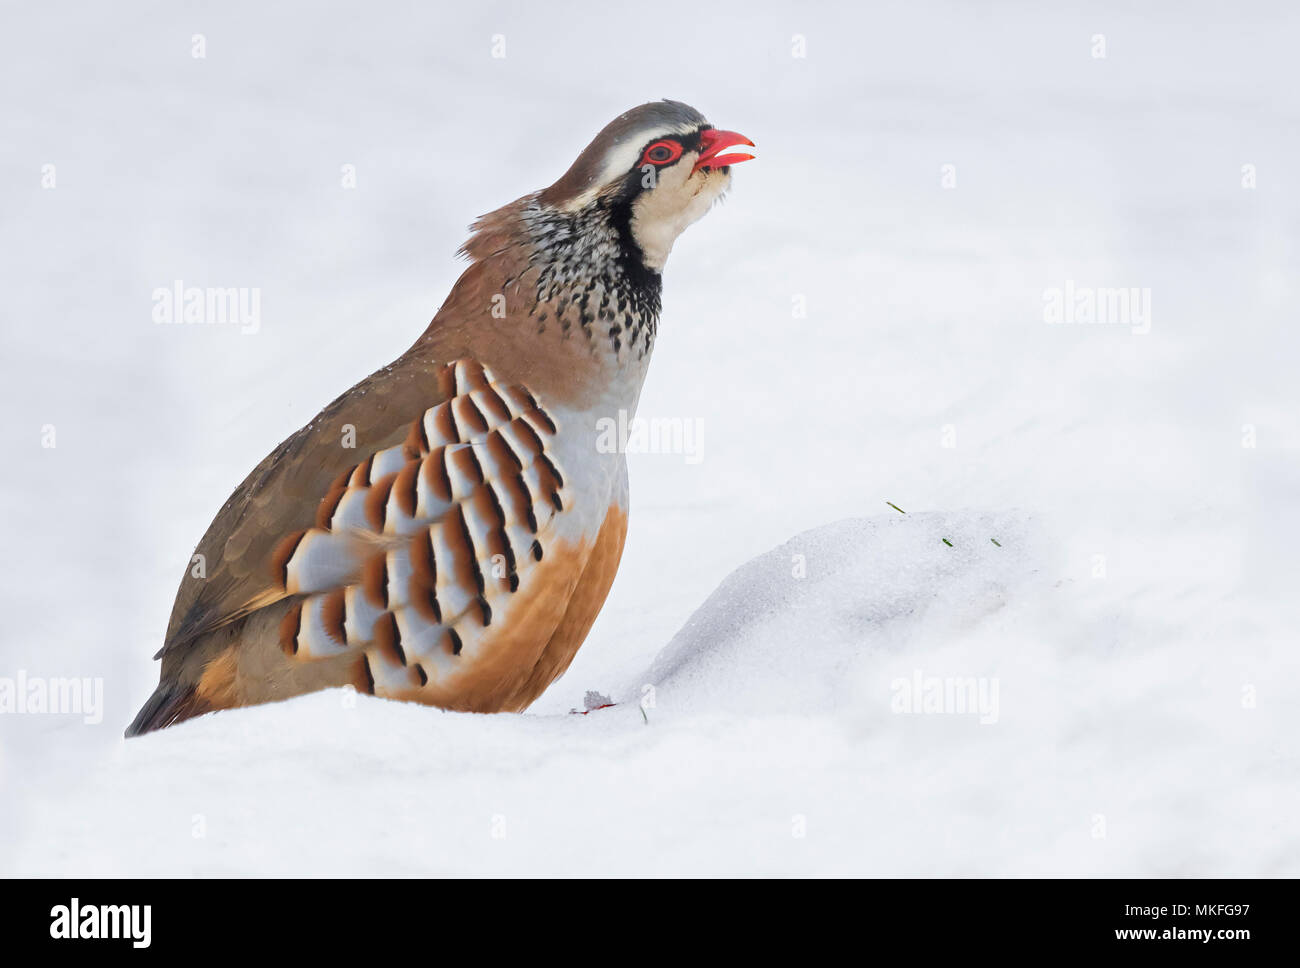 Red-legged partridge (Alectoris rufa)standing in the snow and calling Stock Photo